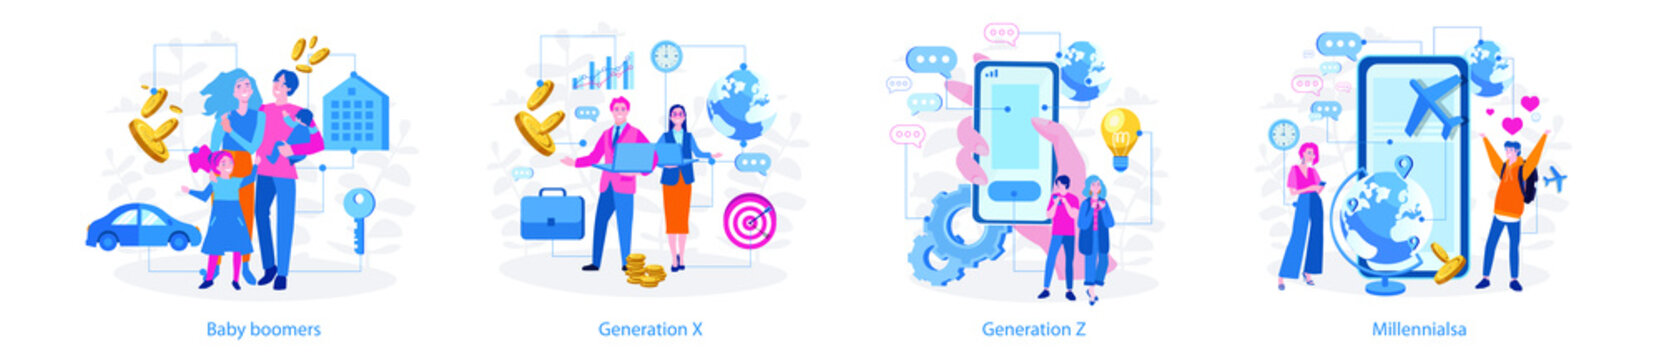 Millennials, Generation Z, Baby boomers, Generation X . Vector illustration for web banner, infographics, mobile. 